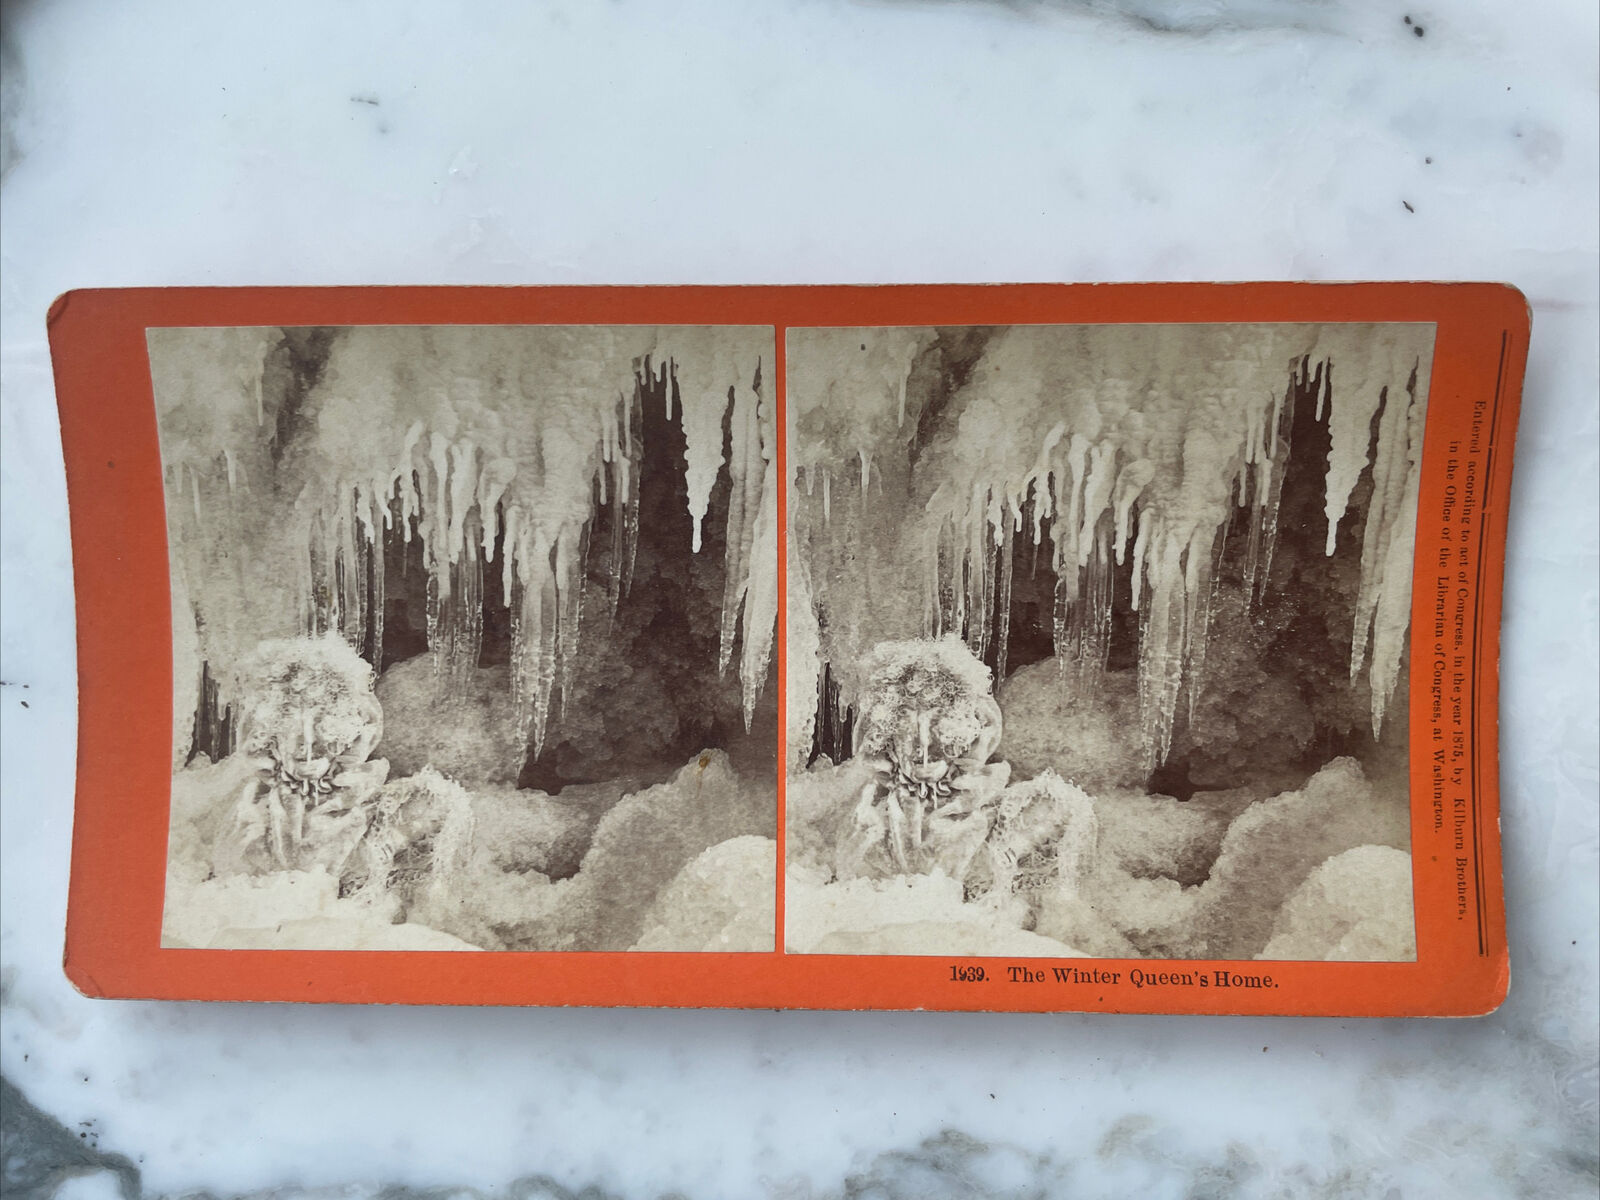 ‘The Winter Queen’s Home’ Creepy Stereoview Copyrighted 1875 By Kilburn Brothers